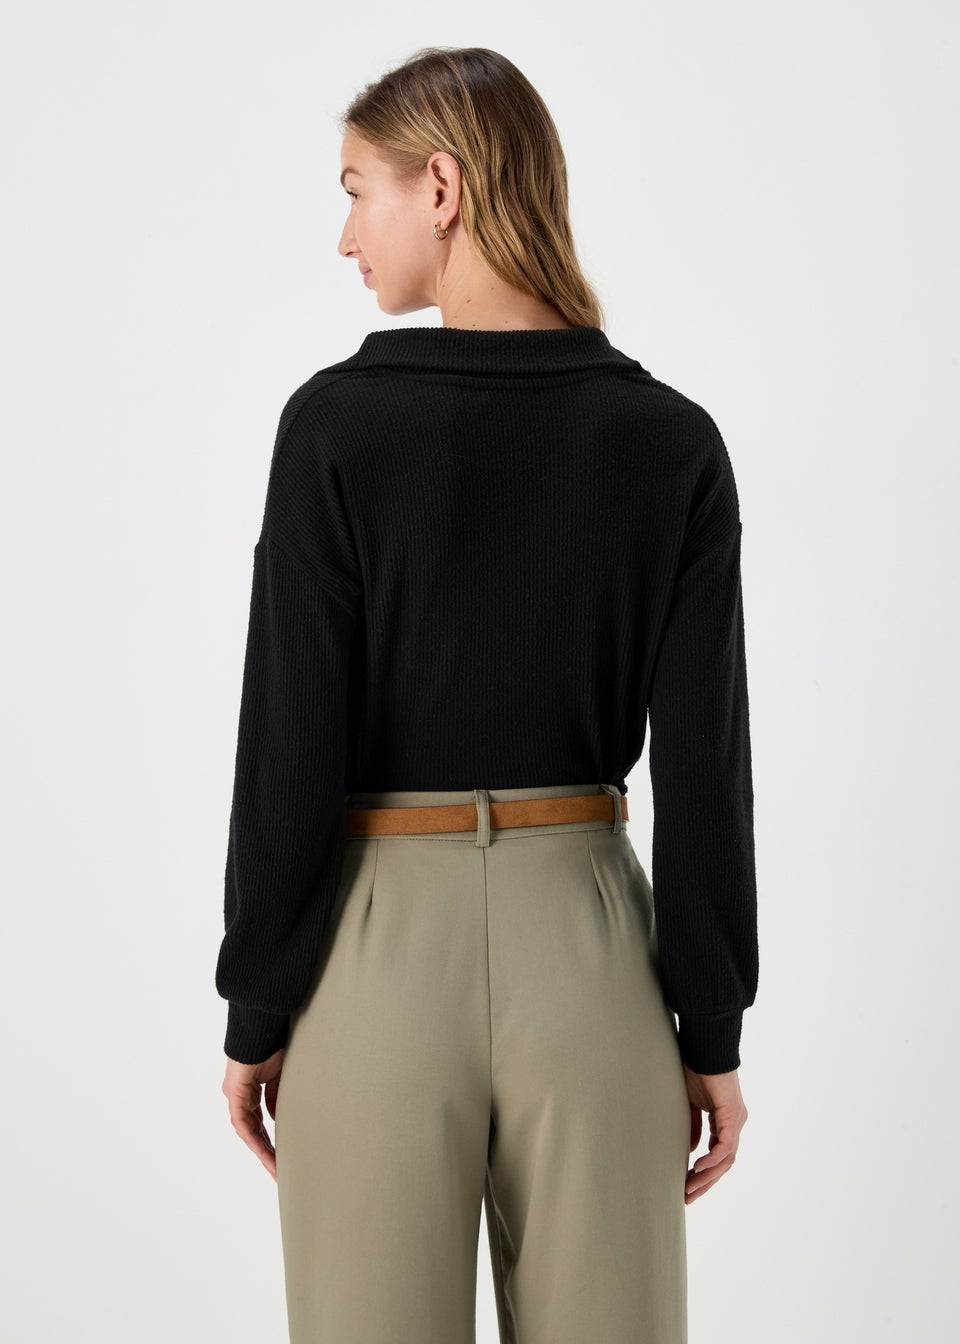 Black Collared Pullover Top